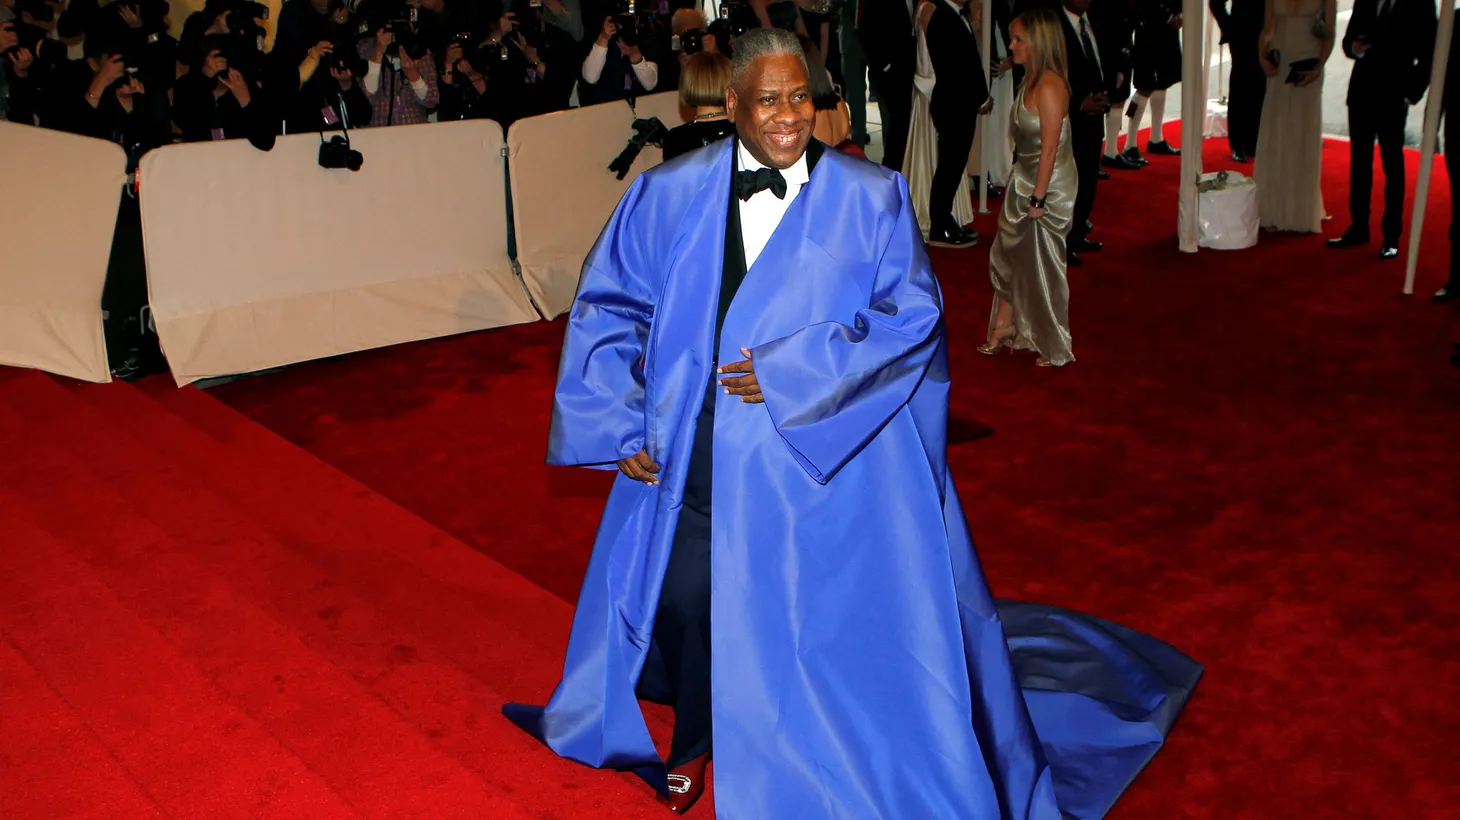 André Leon Talley arrives at the Metropolitan Museum of Art Costume Institute Benefit in New York, May 2, 2011.